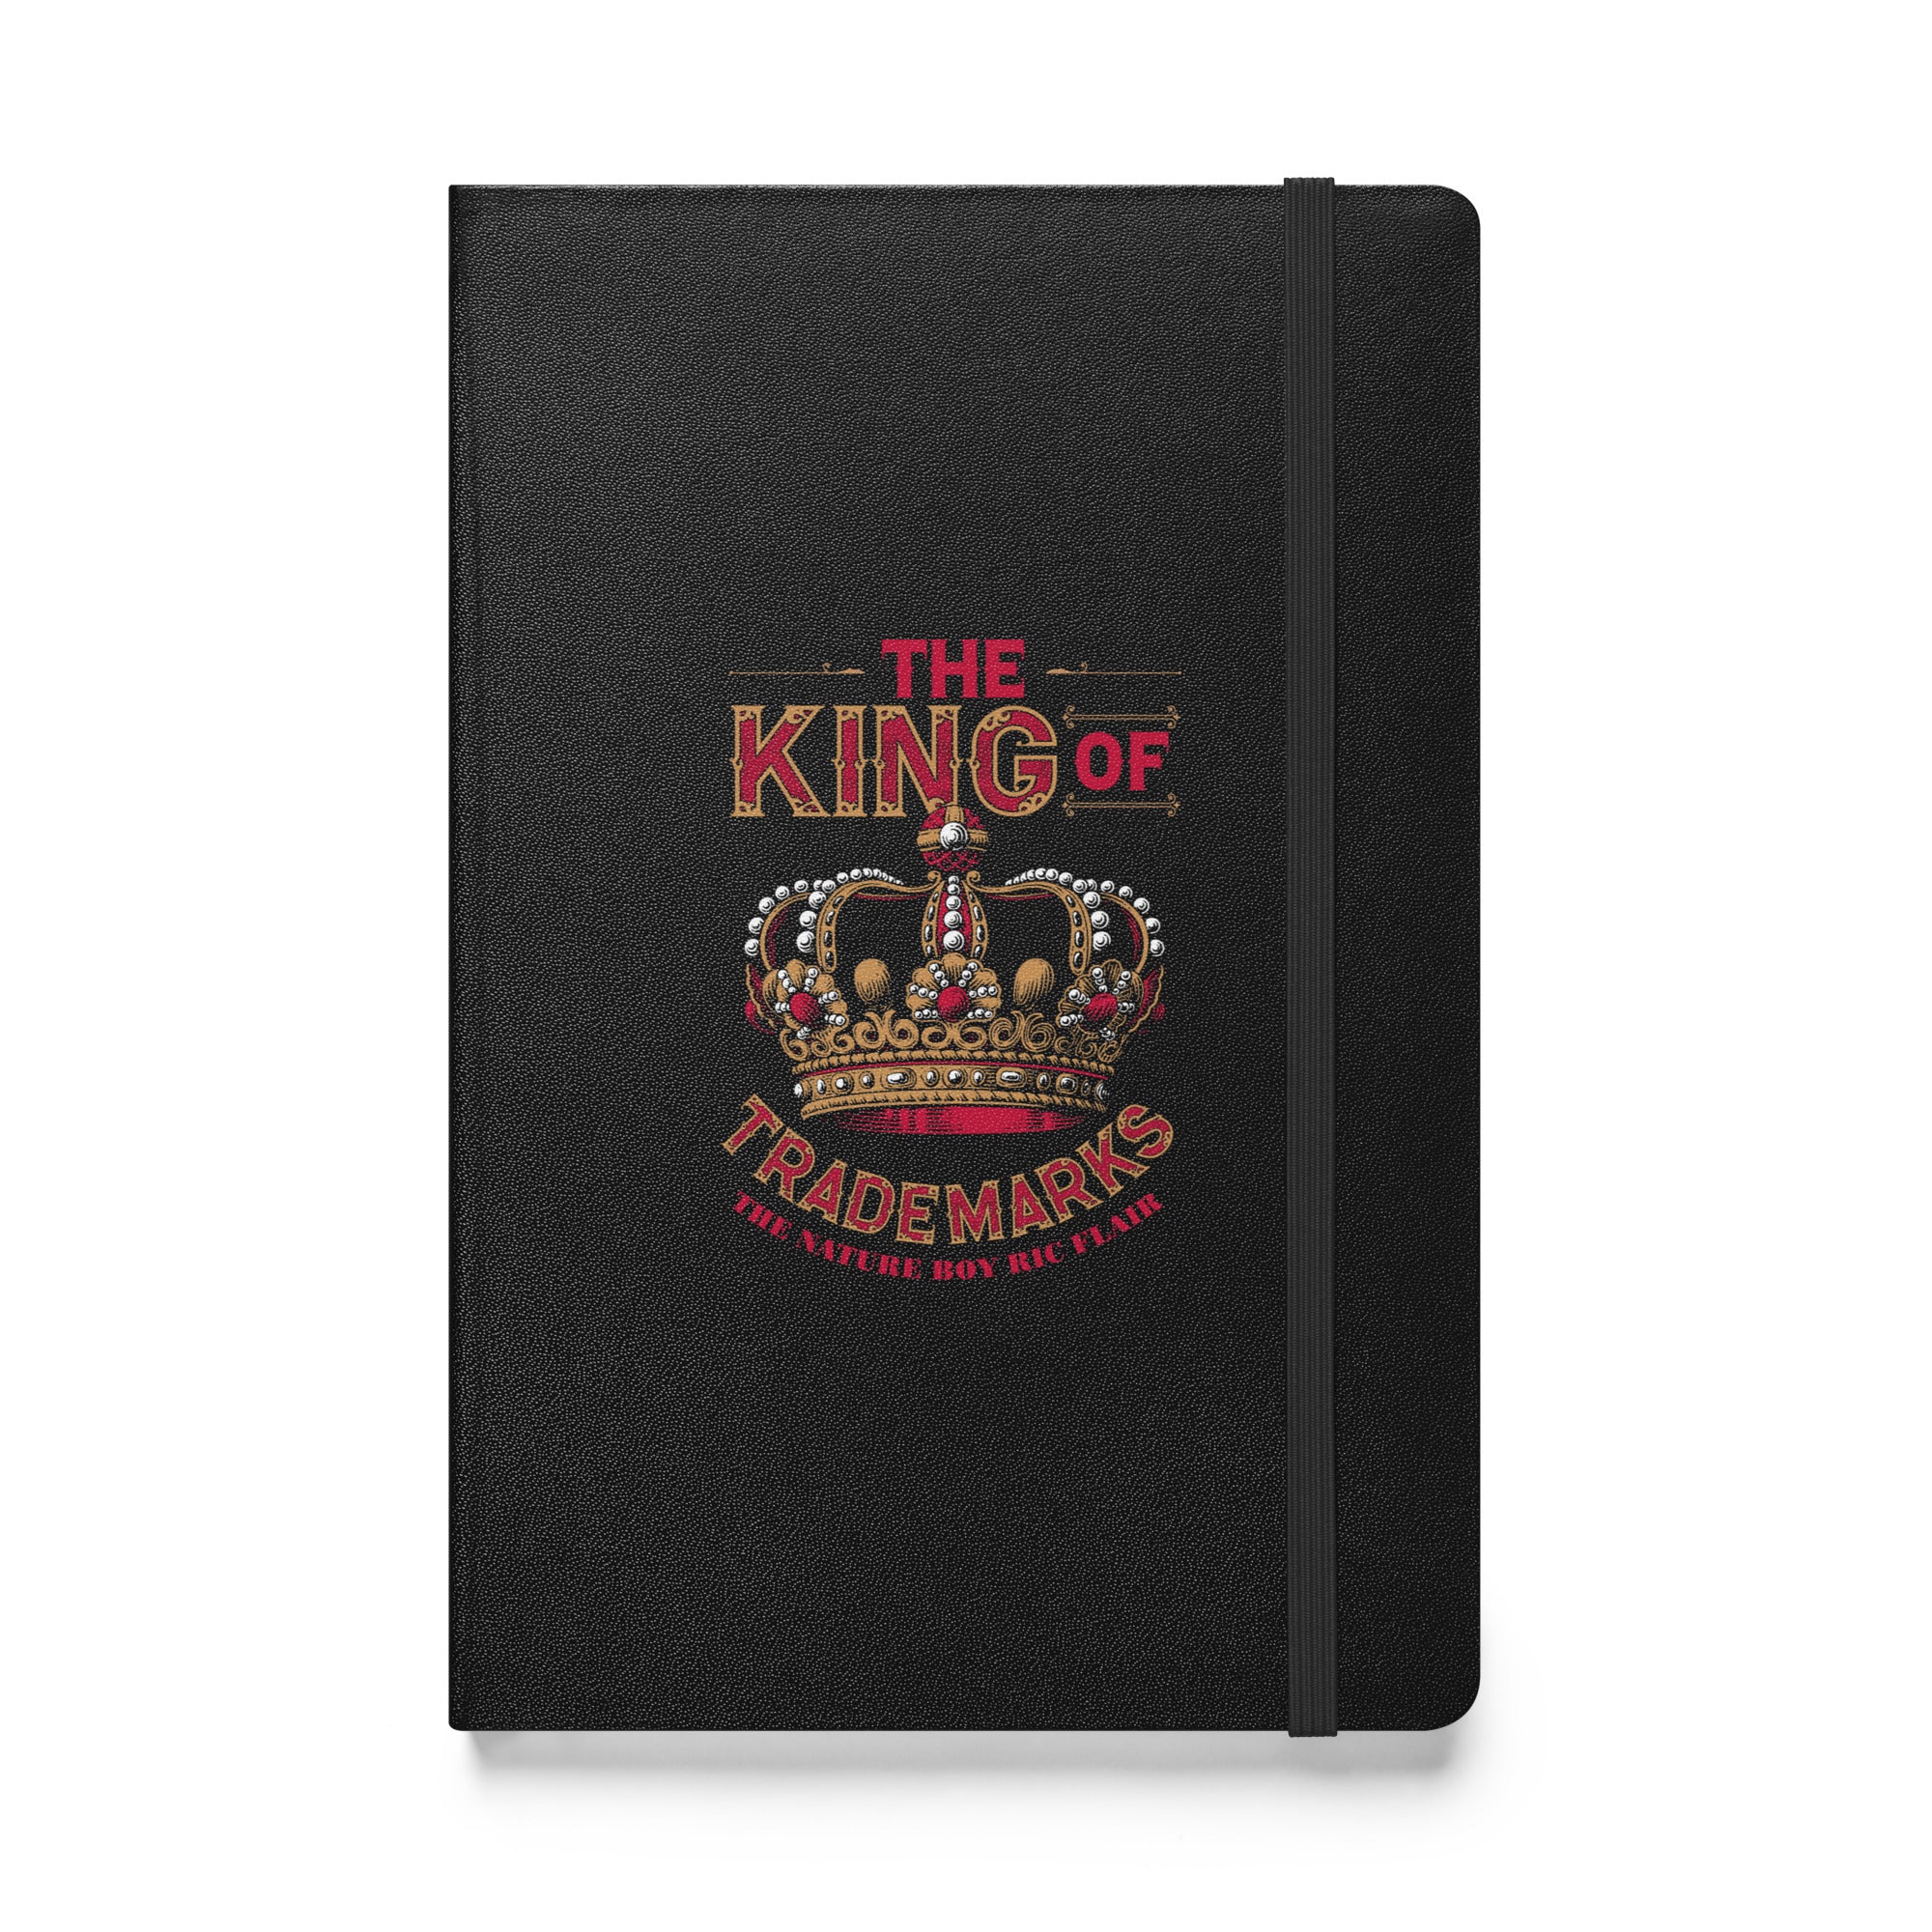 King of Trademarks Hardcover bound notebook